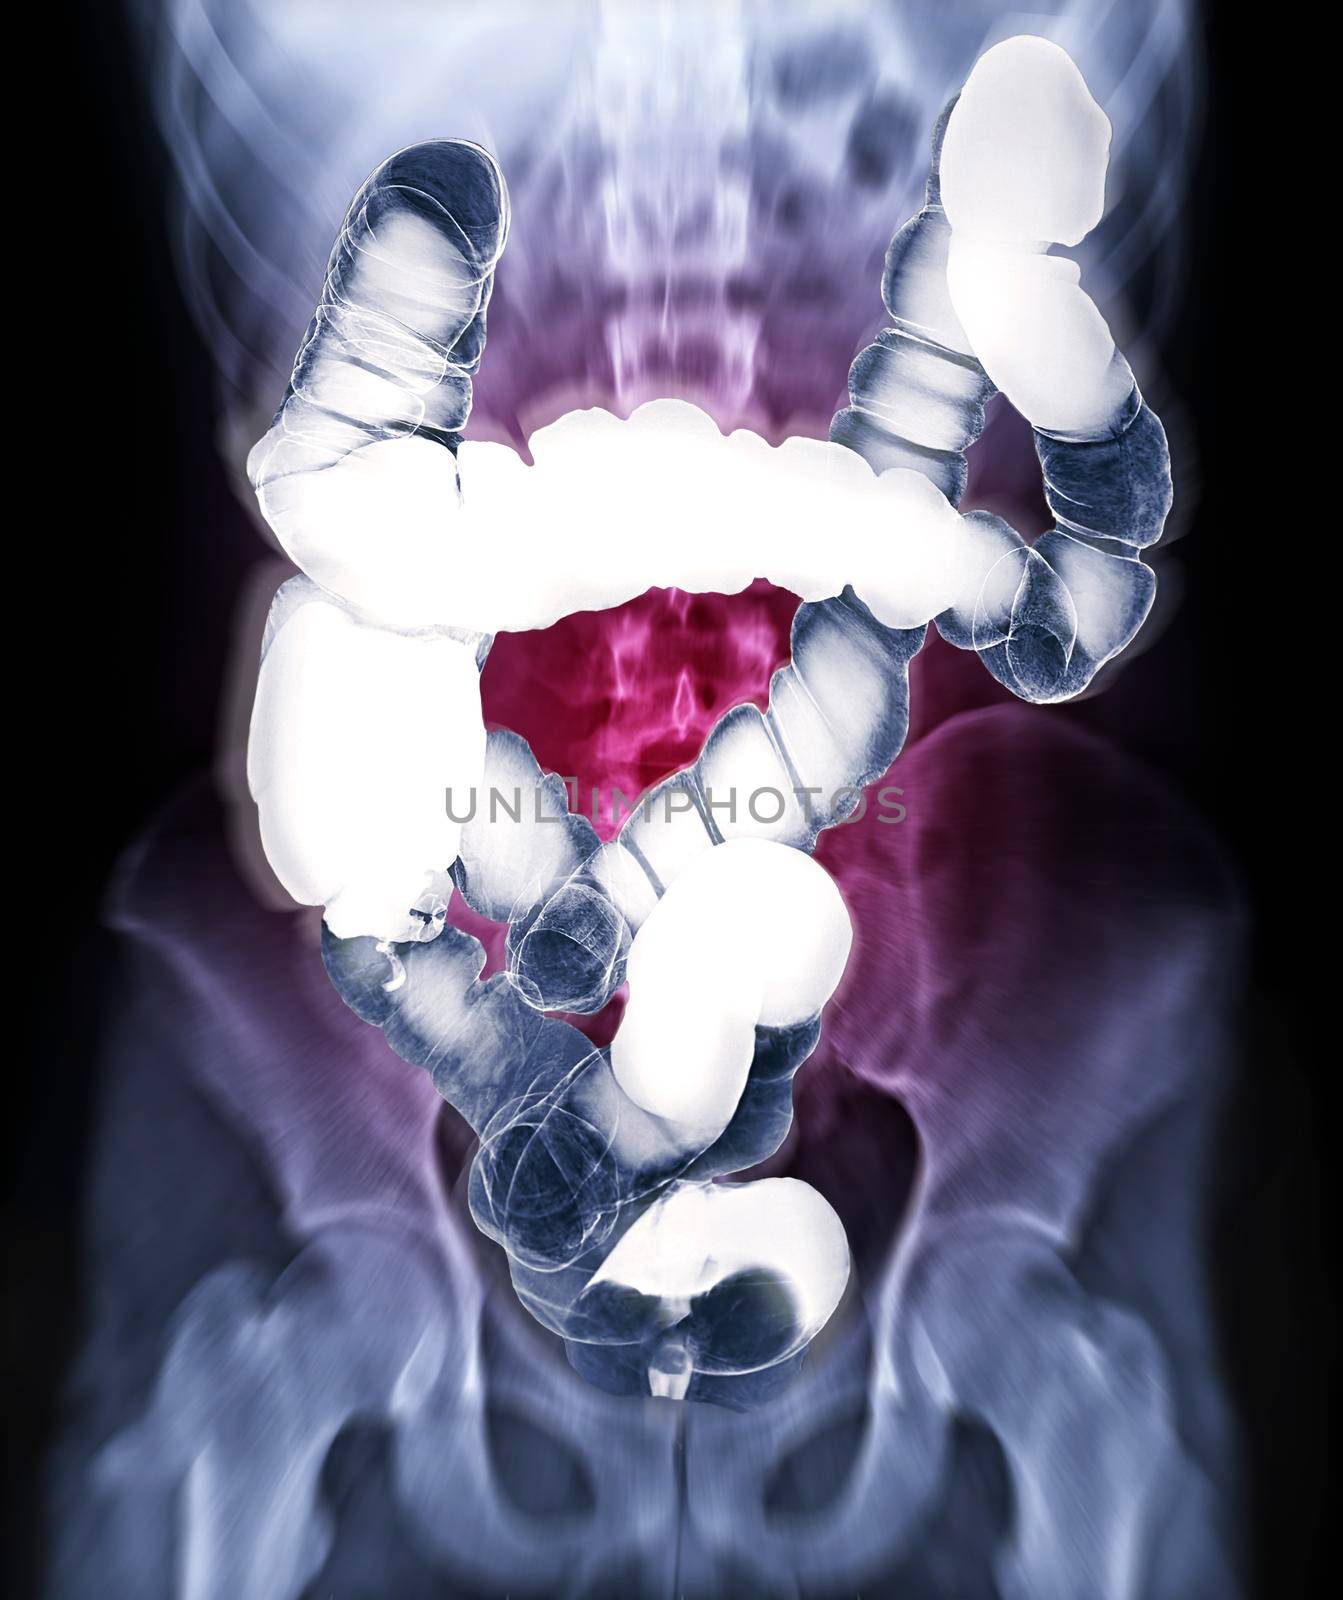 Selective focus of barium enema image or x-ray image of large intestine isolated on blurred abdomen x-ray backgroung showing anatomical of colon for detect Colon cancer . Clipping path.